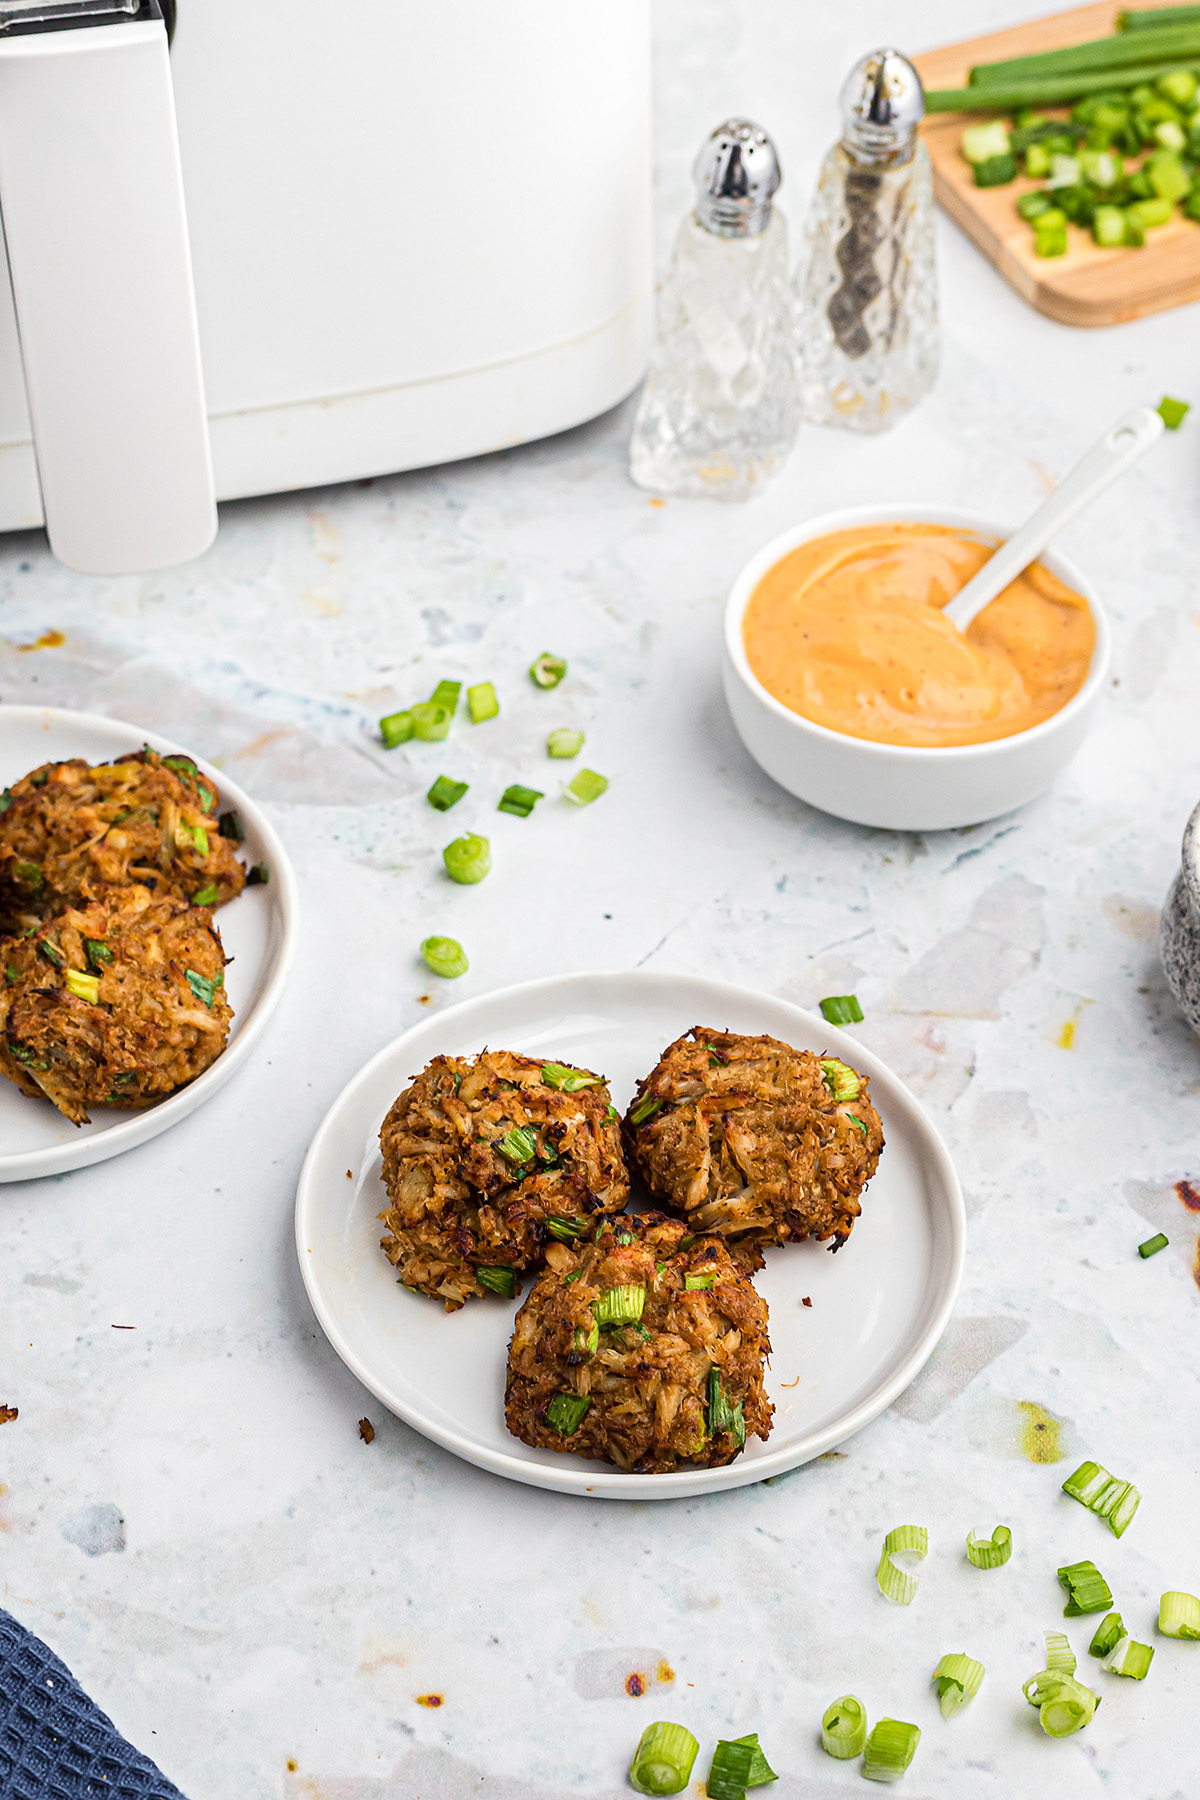 Three crab cakes on a plate in front of an air fryer.